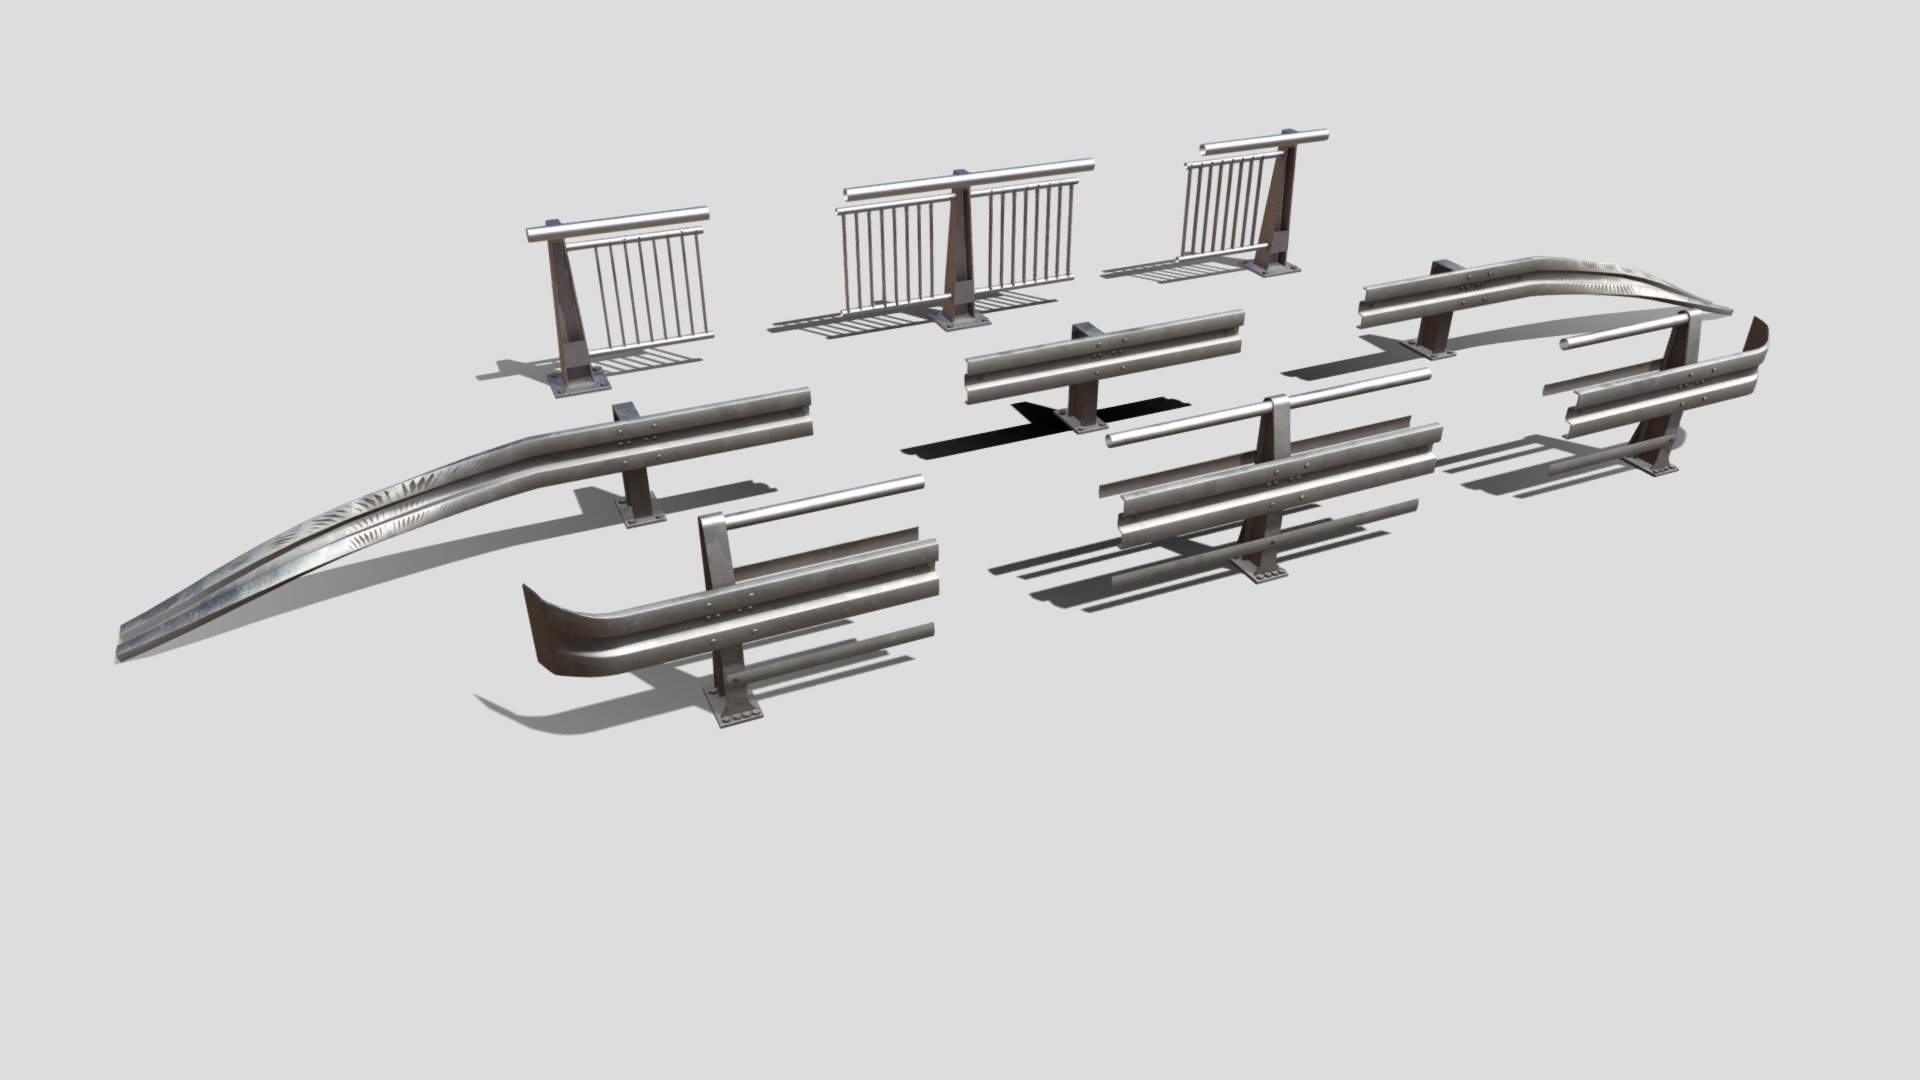 Hi all,

This is PBR Street Barriers pack created in Blender. It includes 9 different models in real world scale. All of the middle pieces can be duplicated to increase the length of the barrier.

The product has 6848 polygons.

It comes in the following formats:
.blend
.fbx
.obj
.dae

The blender file has the shaders set up, so it's ready to render using Cycles. The title image is not included.
It also comes with set of 4K .png maps:
base color
roughness
normal
metallic - Street Barriers Pack - Buy Royalty Free 3D model by kambur 3d model